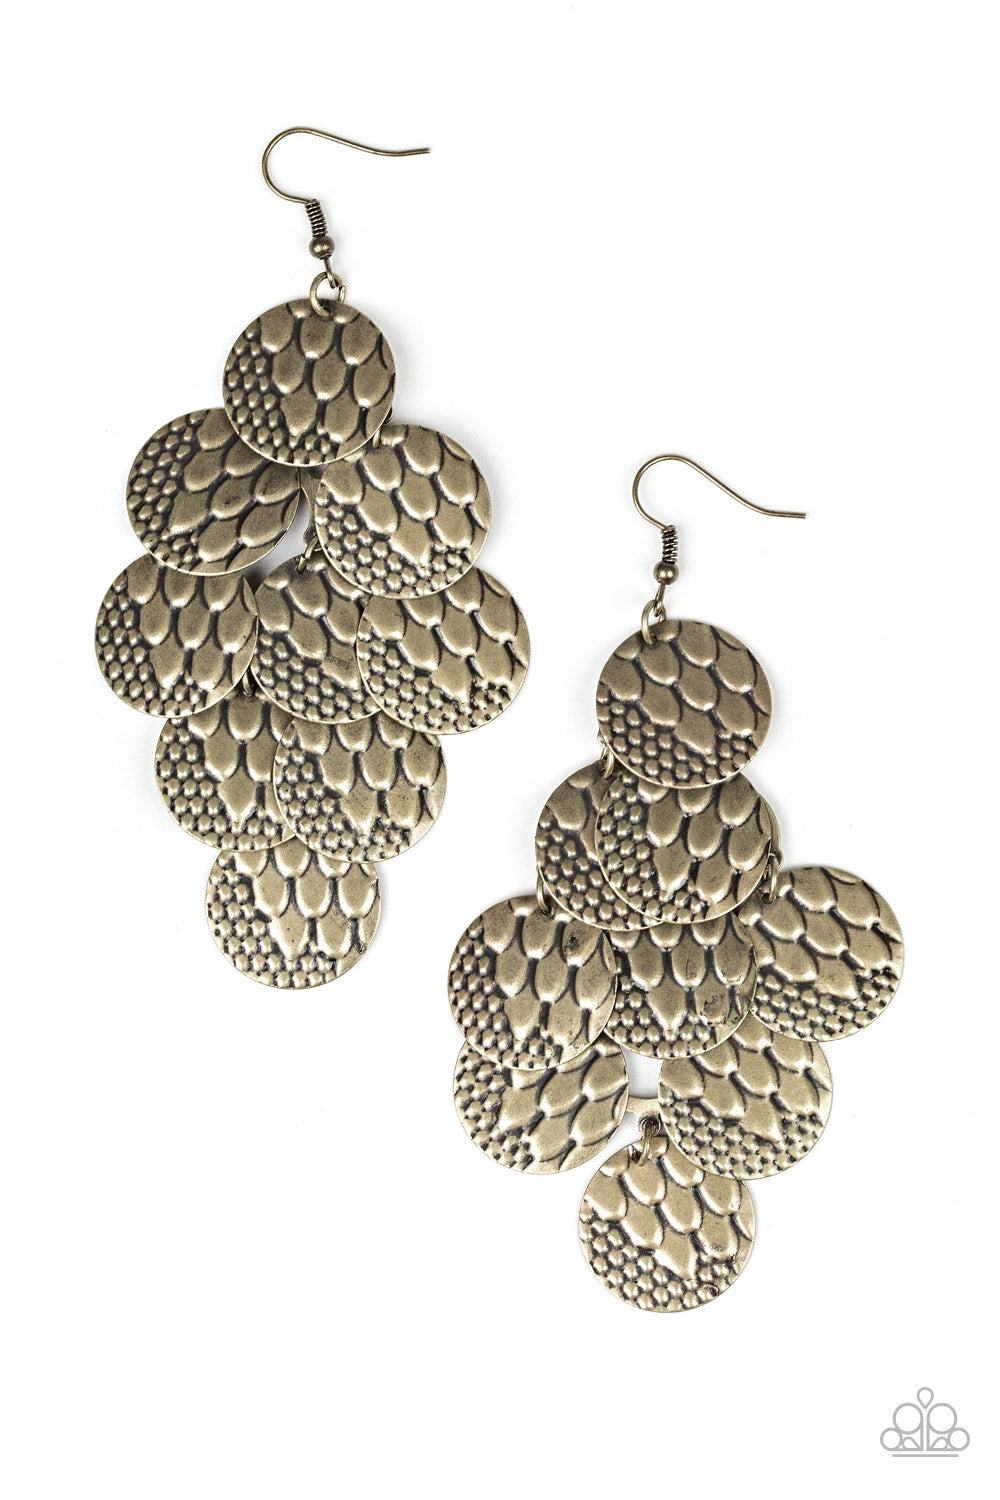 THE PARTY ANIMAL - BRASS EARRING